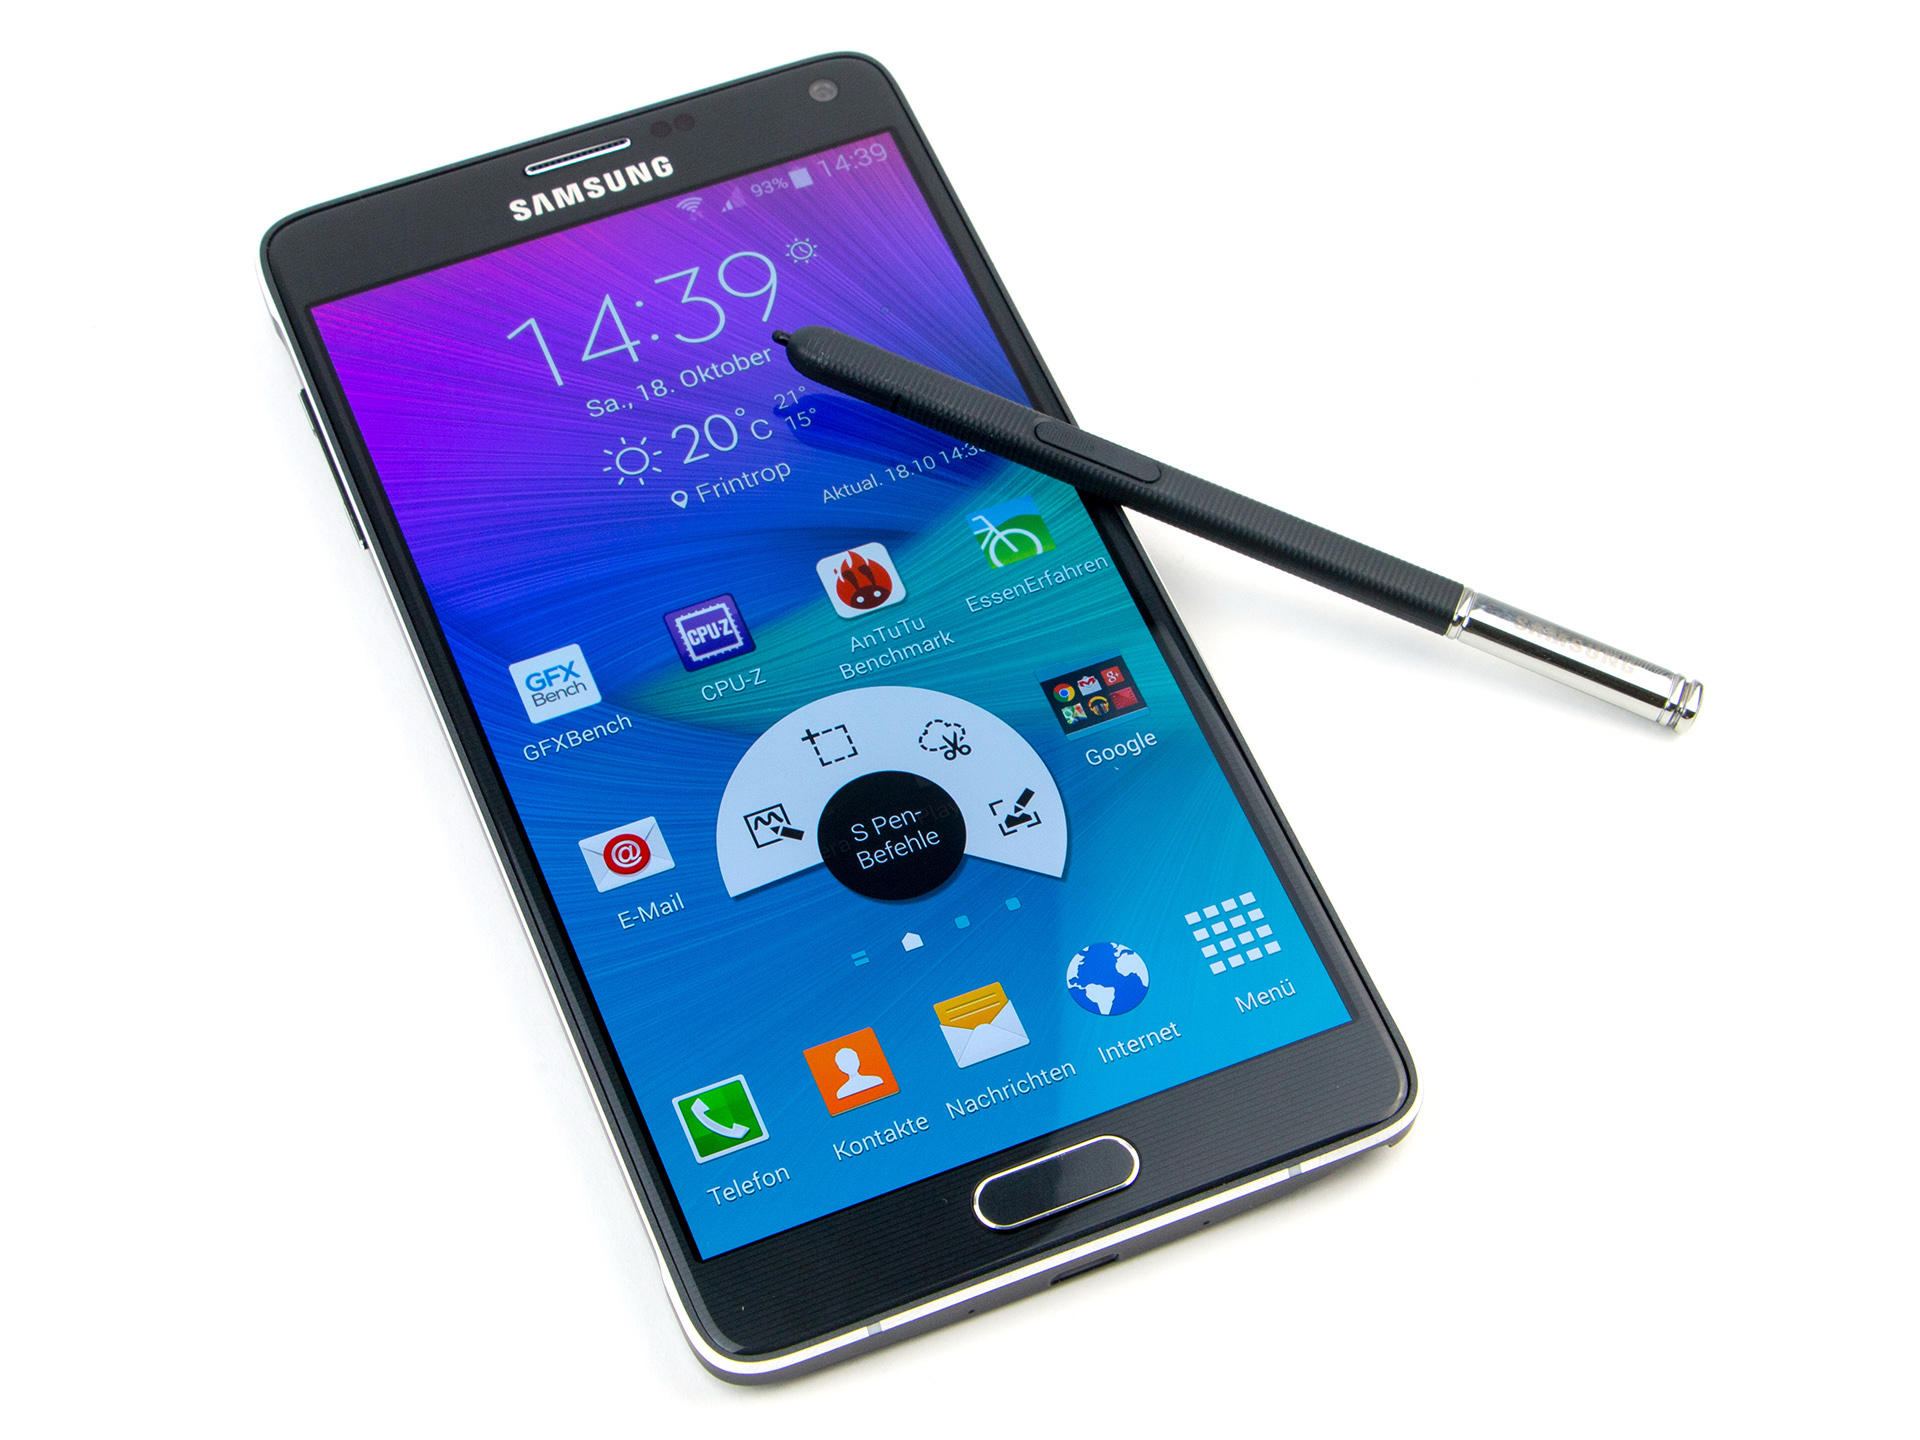 note 4 phone